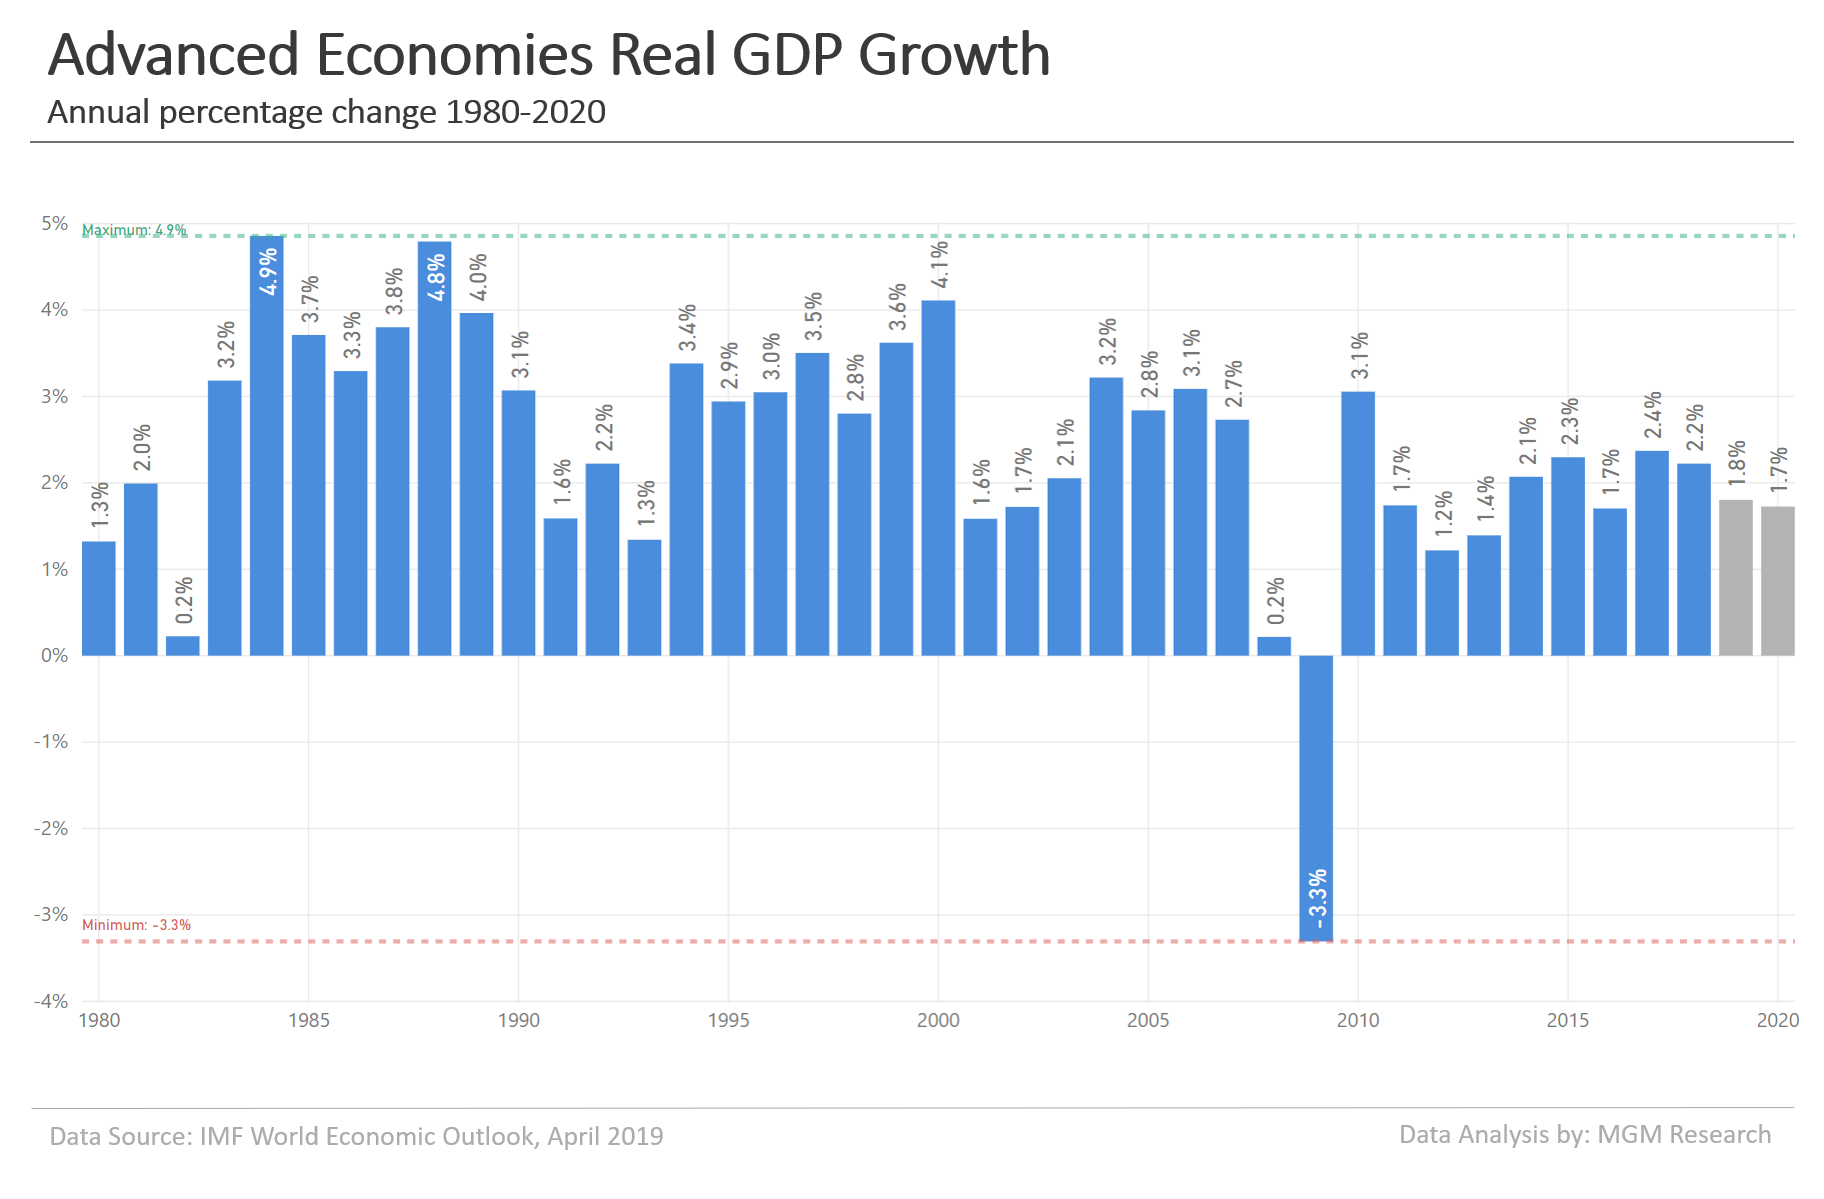 Advanced economies real GDP growth 1980-2020